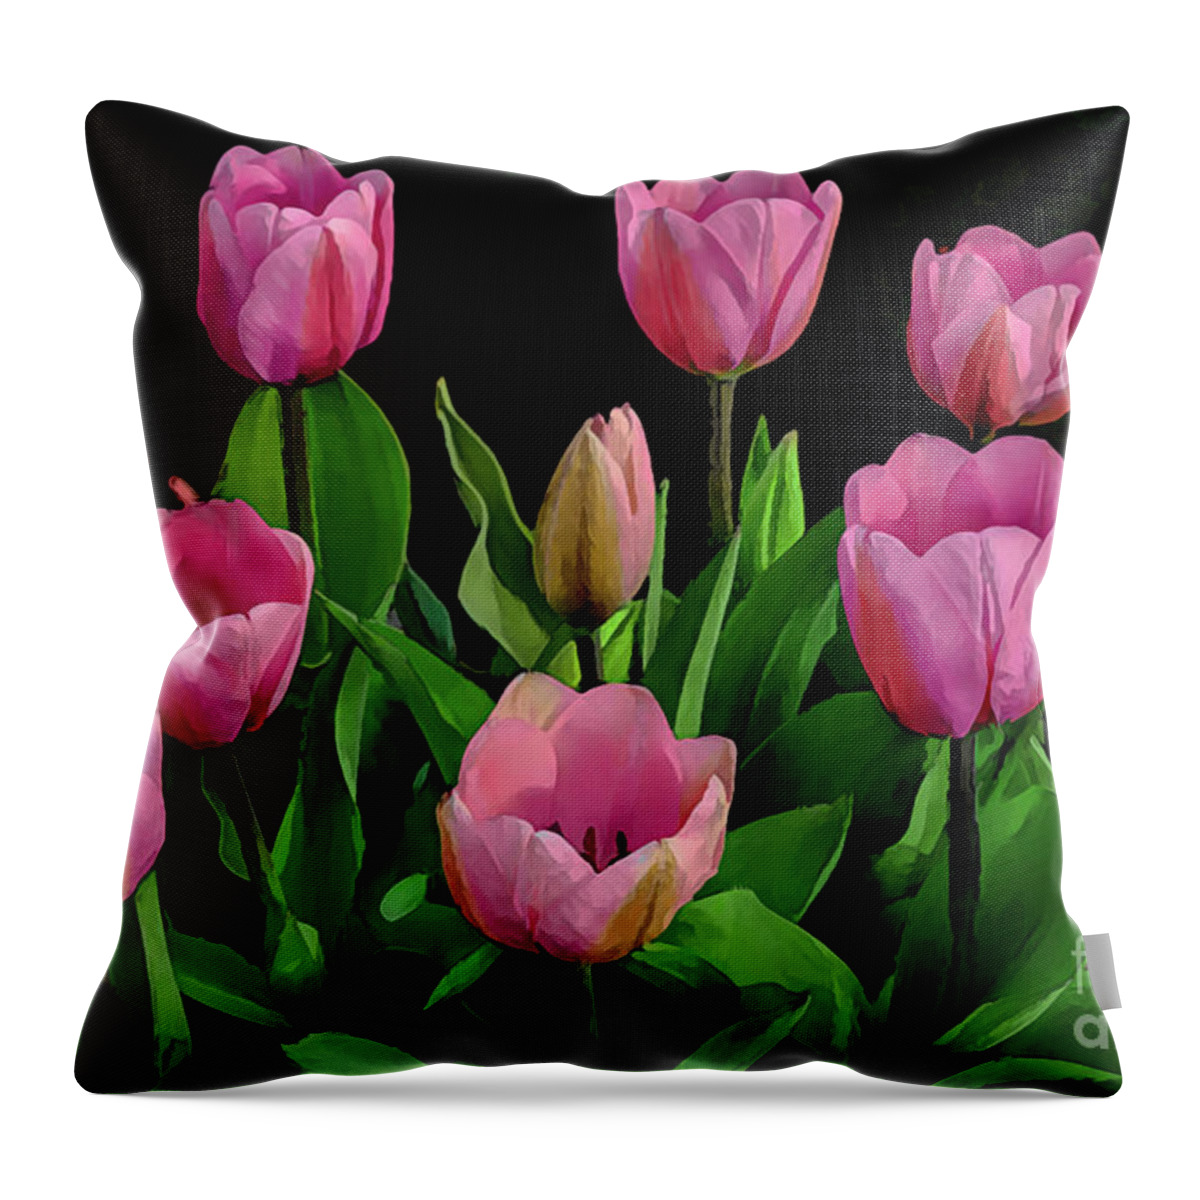 Pink Throw Pillow featuring the photograph Pink Impressions - Springtime Tulips by Diana Mary Sharpton